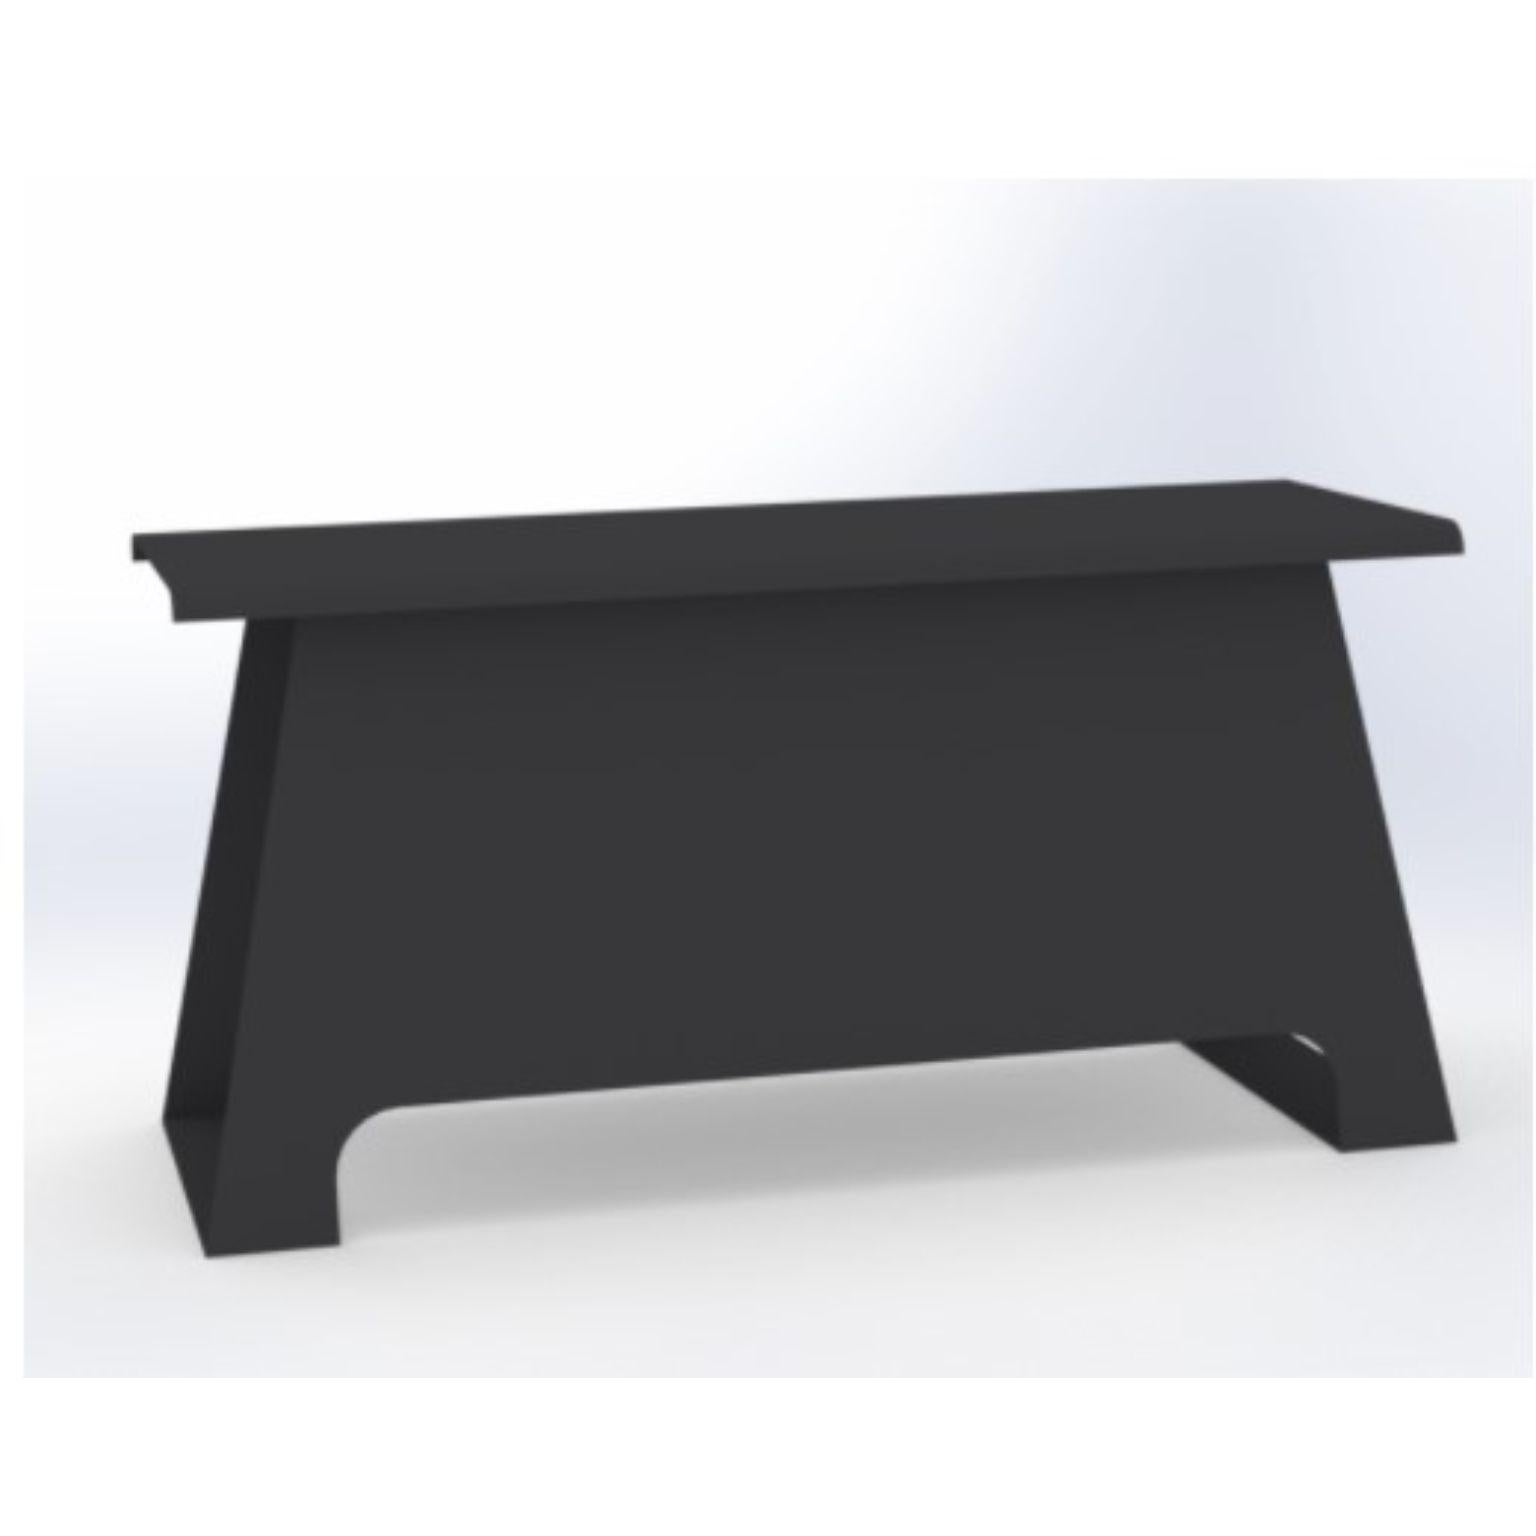 The Old School 100 Black Bench by Harm De Veer
Dimensions: D100 x W40 x H50 cm
Materials: Steel - thermolytic galvanizing - Powdercoating - Coating
Weight: 42 kg
Also available in various colours and sizes.

The Old school is based on the